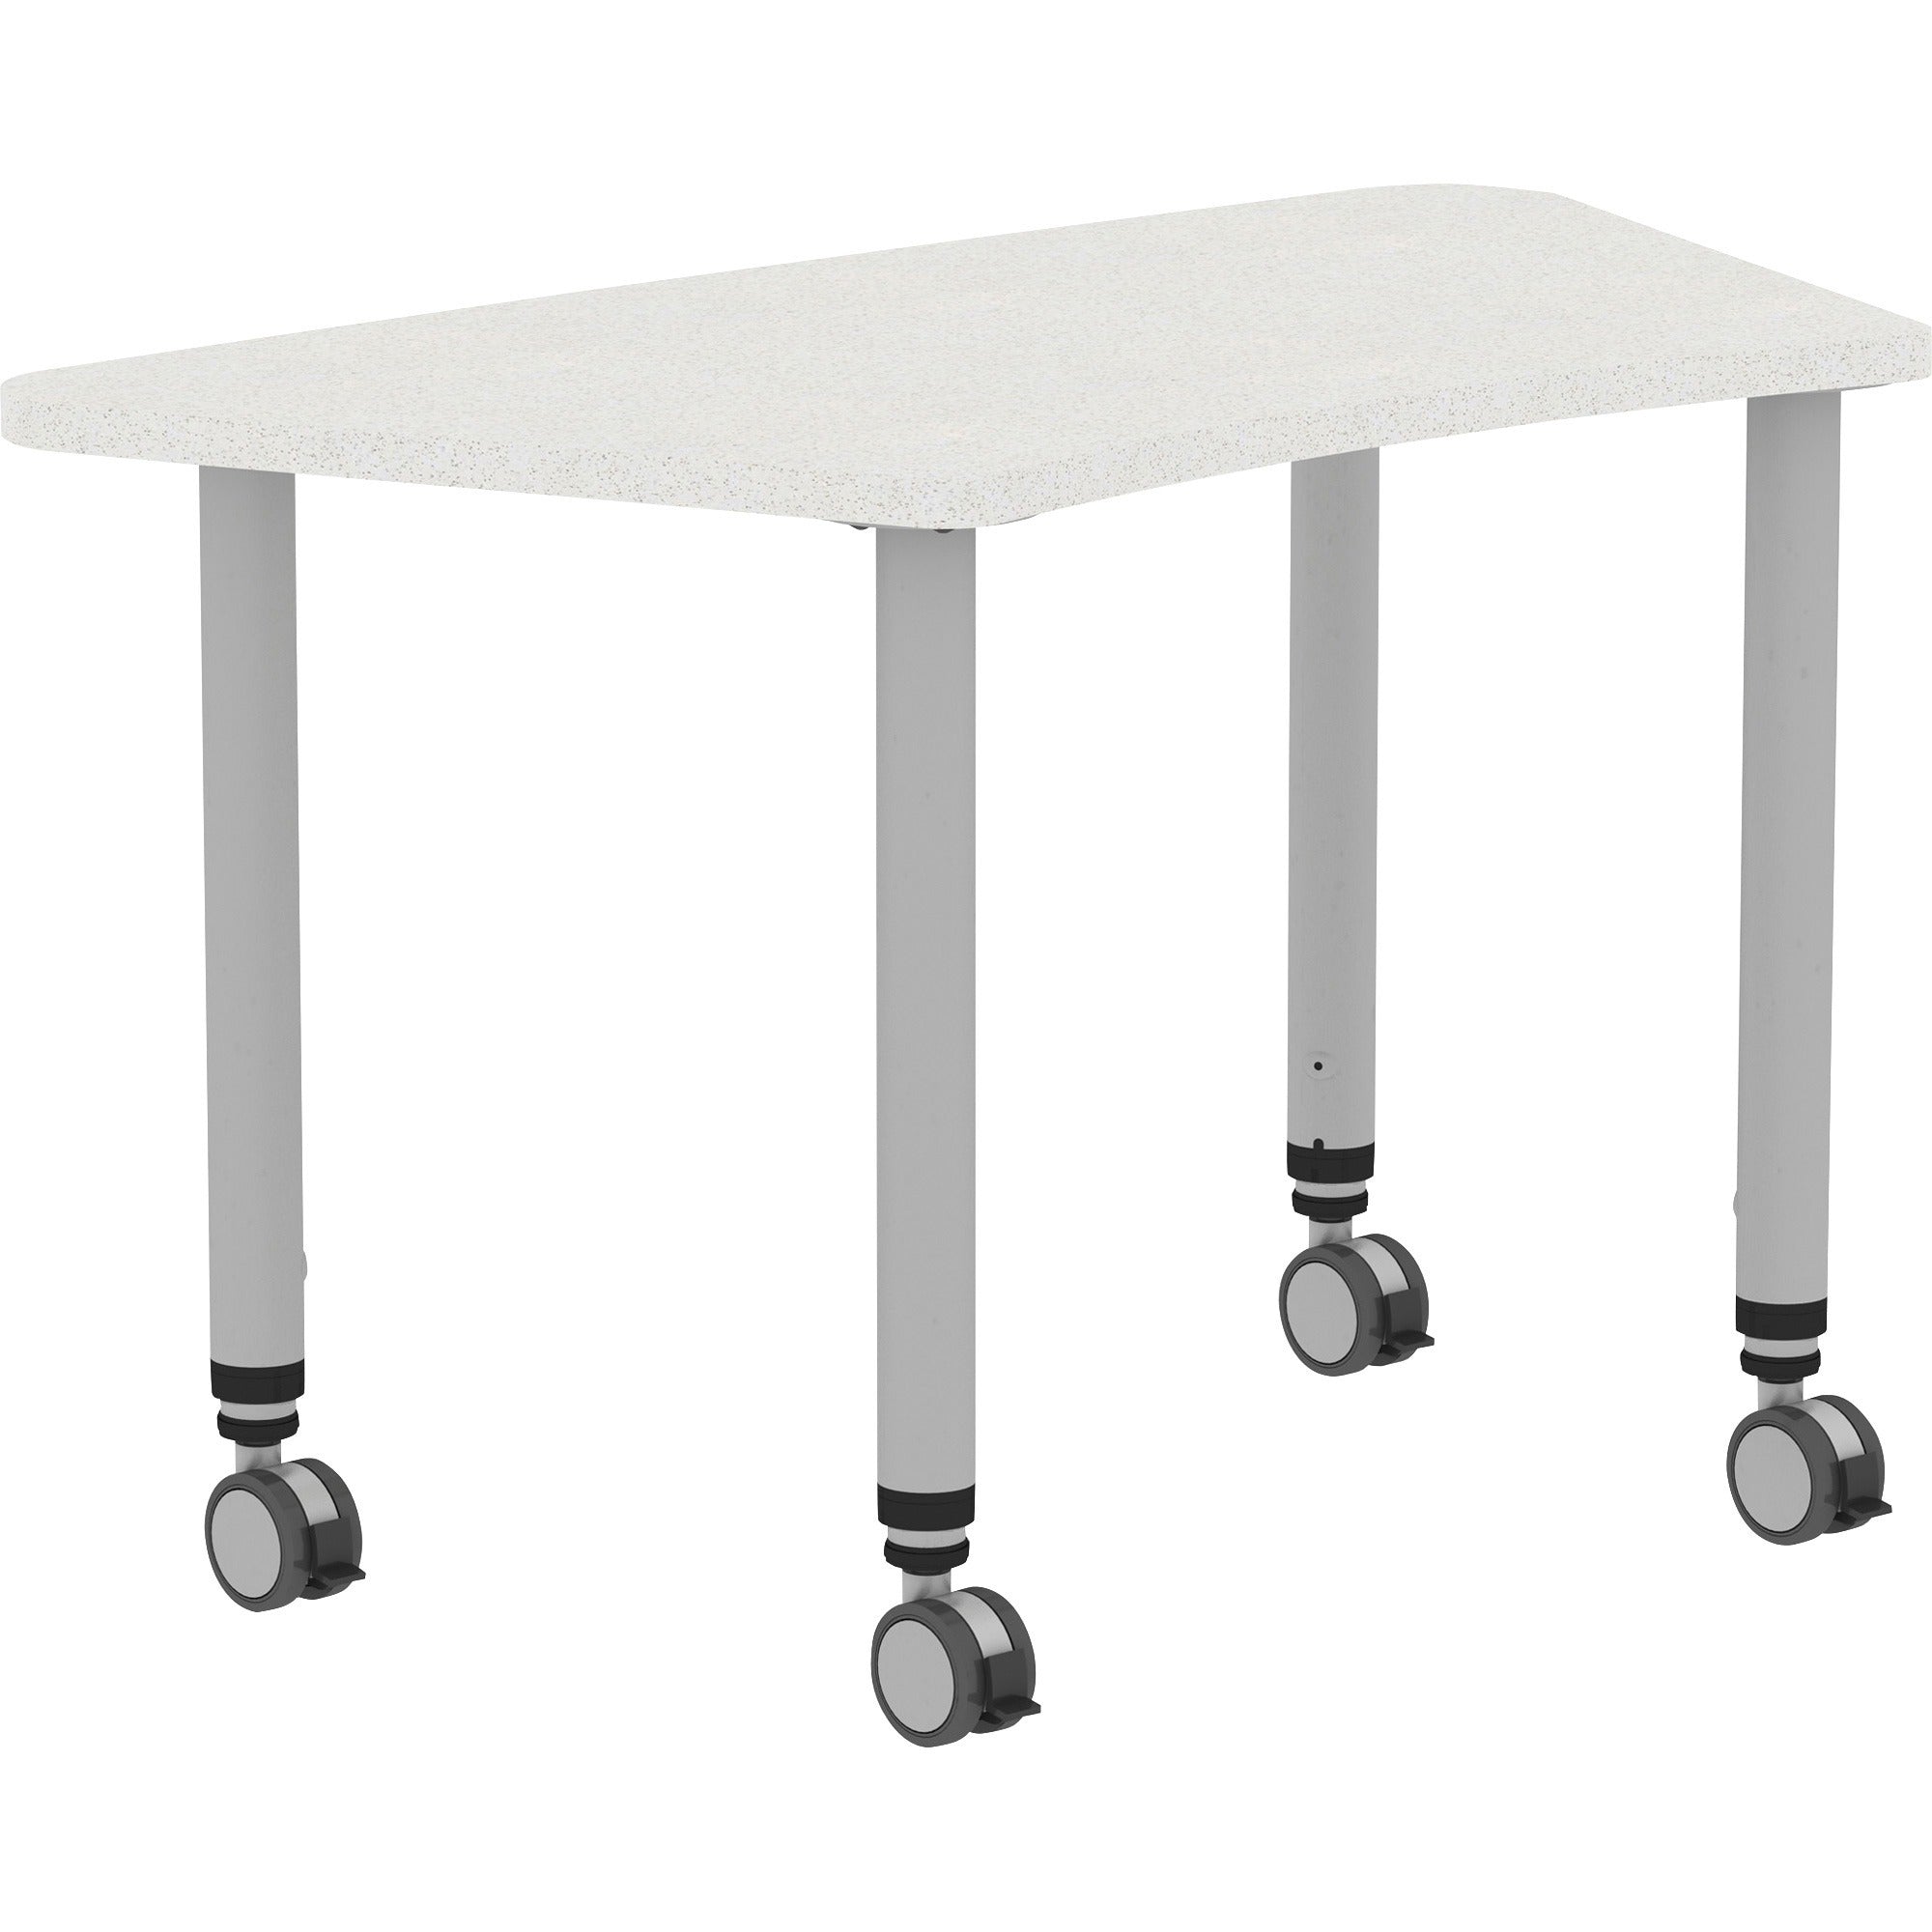 lorell-attune-height-adjustable-multipurpose-curved-table-for-table-toptrapezoid-top-adjustable-height-2662-to-3362-adjustment-x-60-table-top-width-x-2362-table-top-depth-3362-height-assembly-required-laminated-gray-laminate_llr69583 - 2